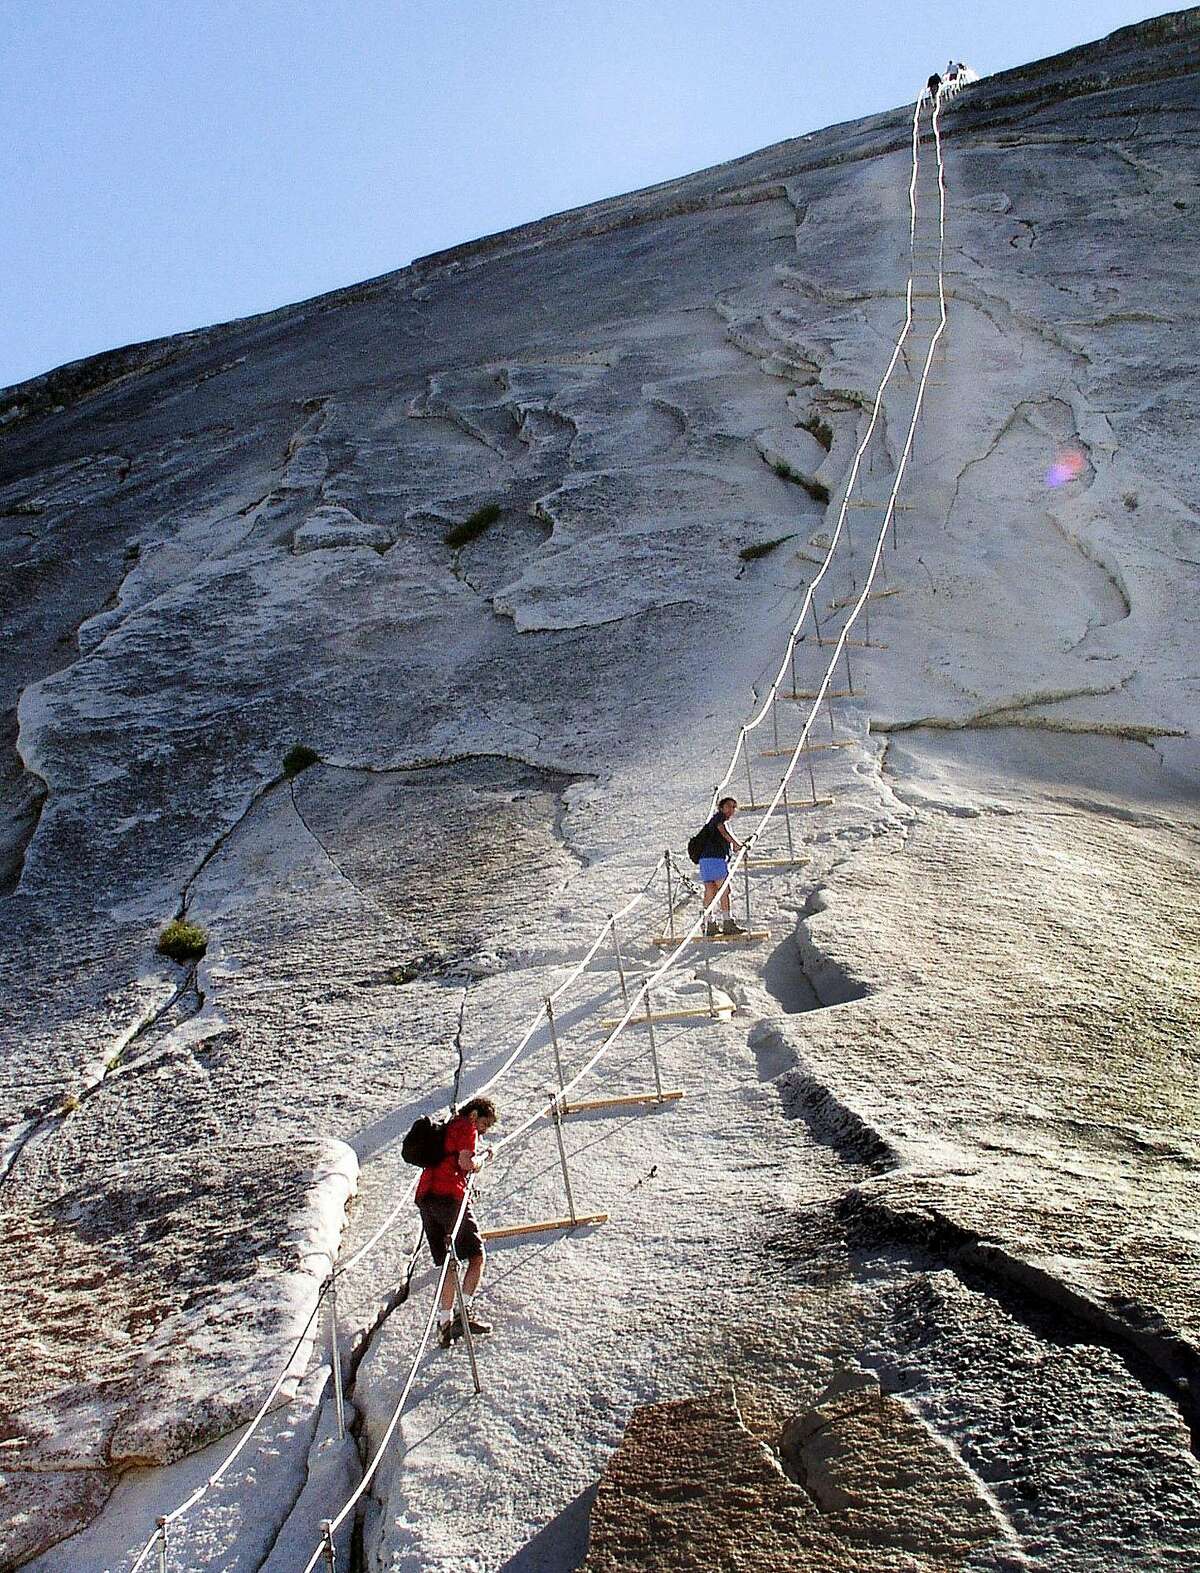 Hikers decend the cable route after climbing to summit of Half Dome, June 6, 2004, in Yosemite National Park. In 1875 George Anderson first climbed this route by drilling holes in the granite and attaching ropes to pull himself to the summit. The park has maintained permanent cables here since 1919. (AP Photo/Robert F. Bukaty)